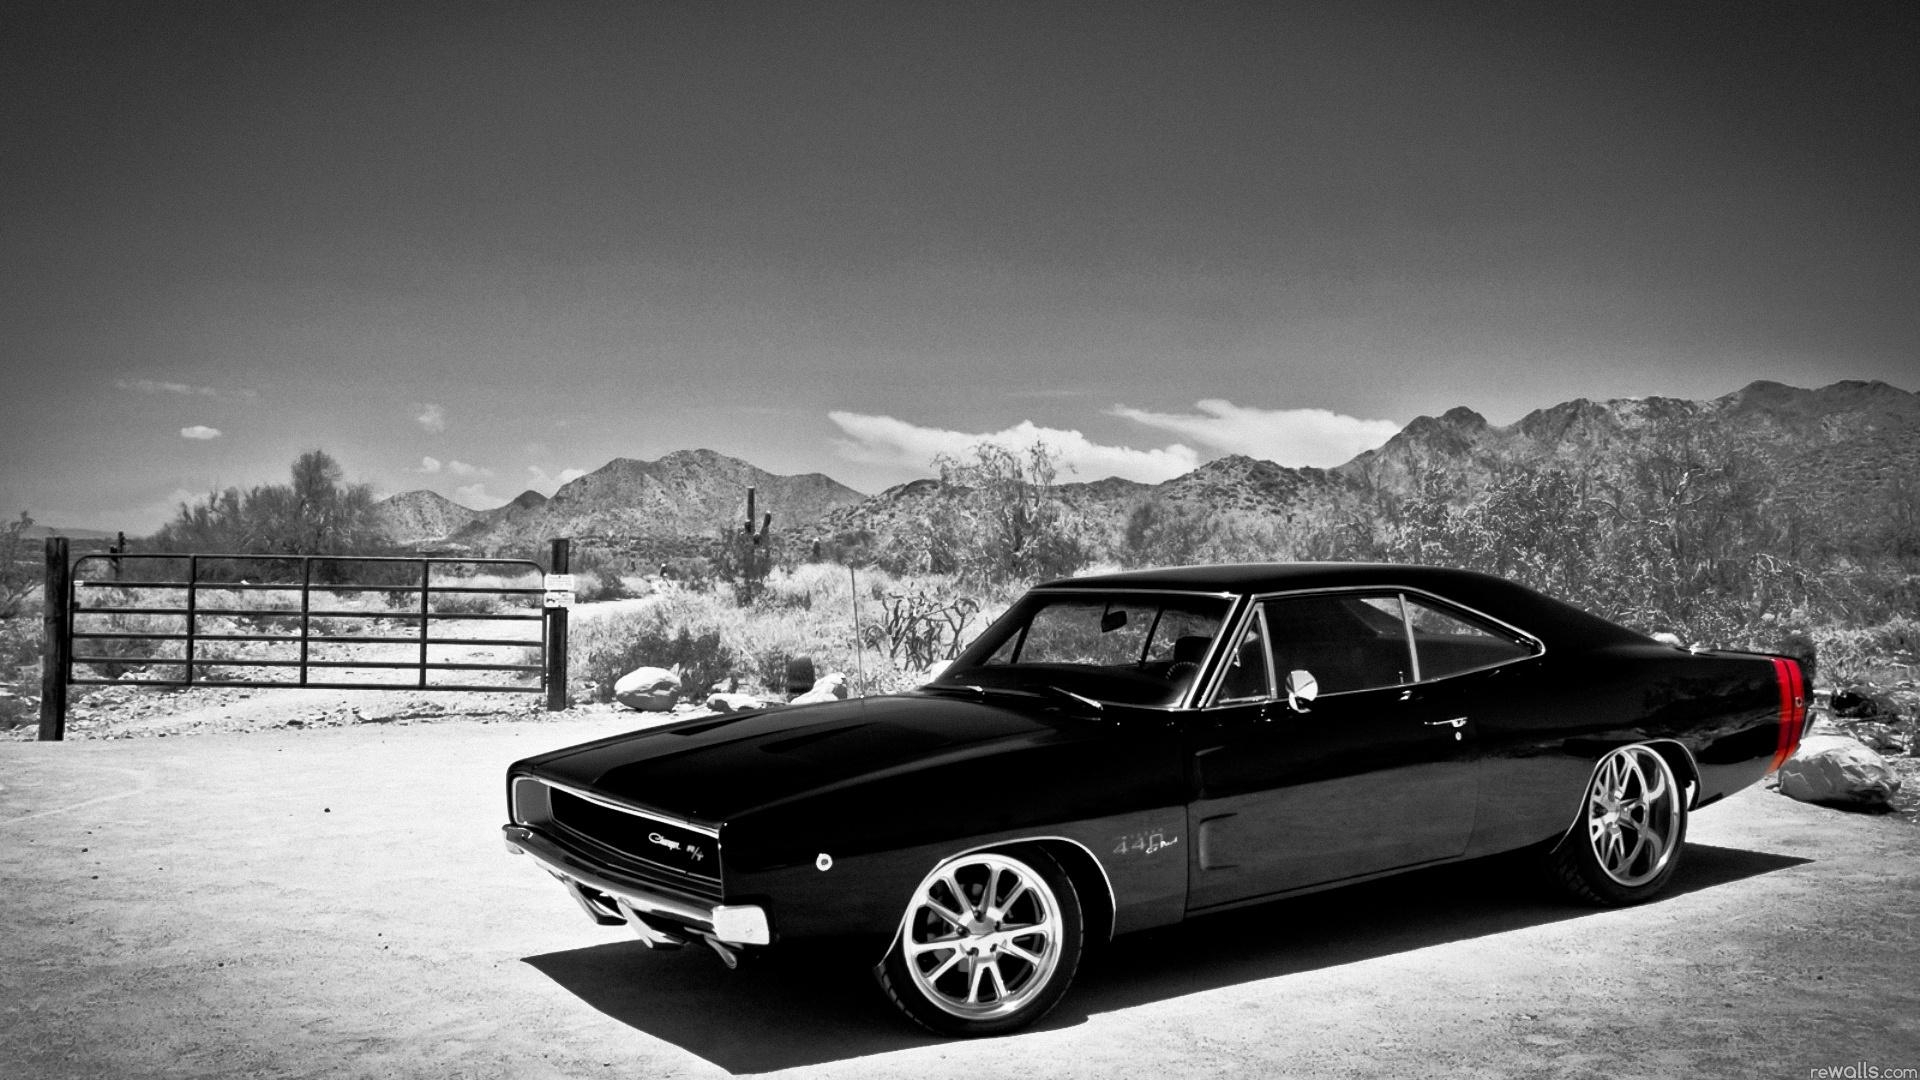 muscle cars backgrounds group (82+)